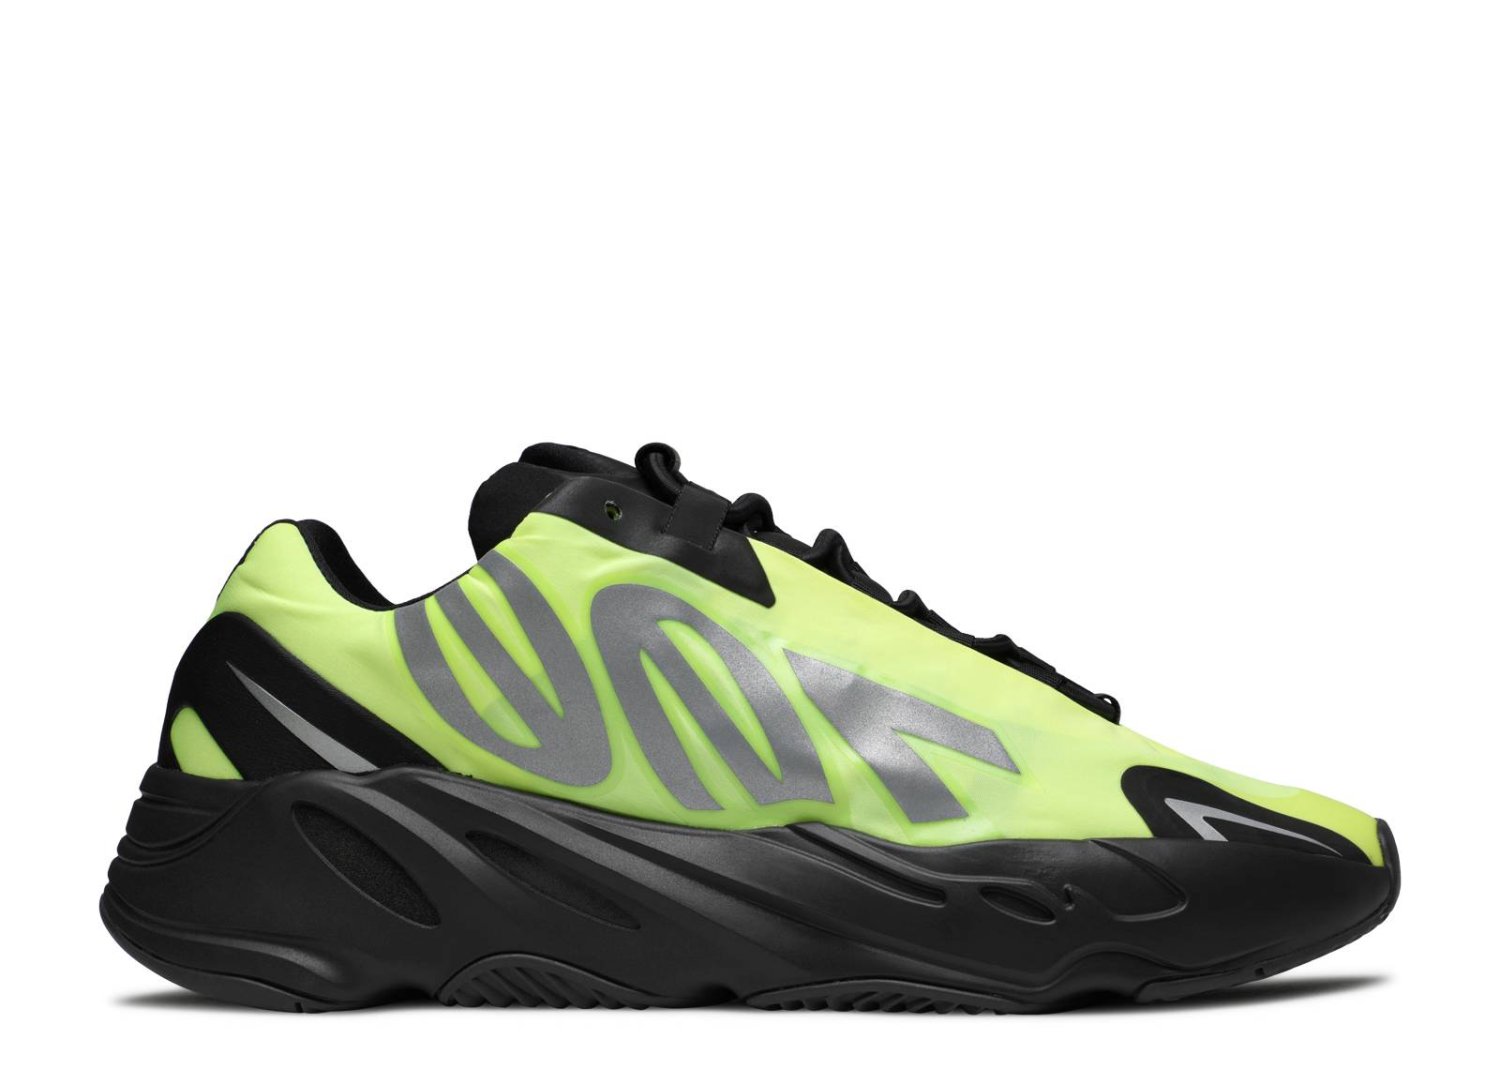 US$ 127.98 - Yeezy Boost 700 Shoes MNVN Phosphor – FY3727 - www ...